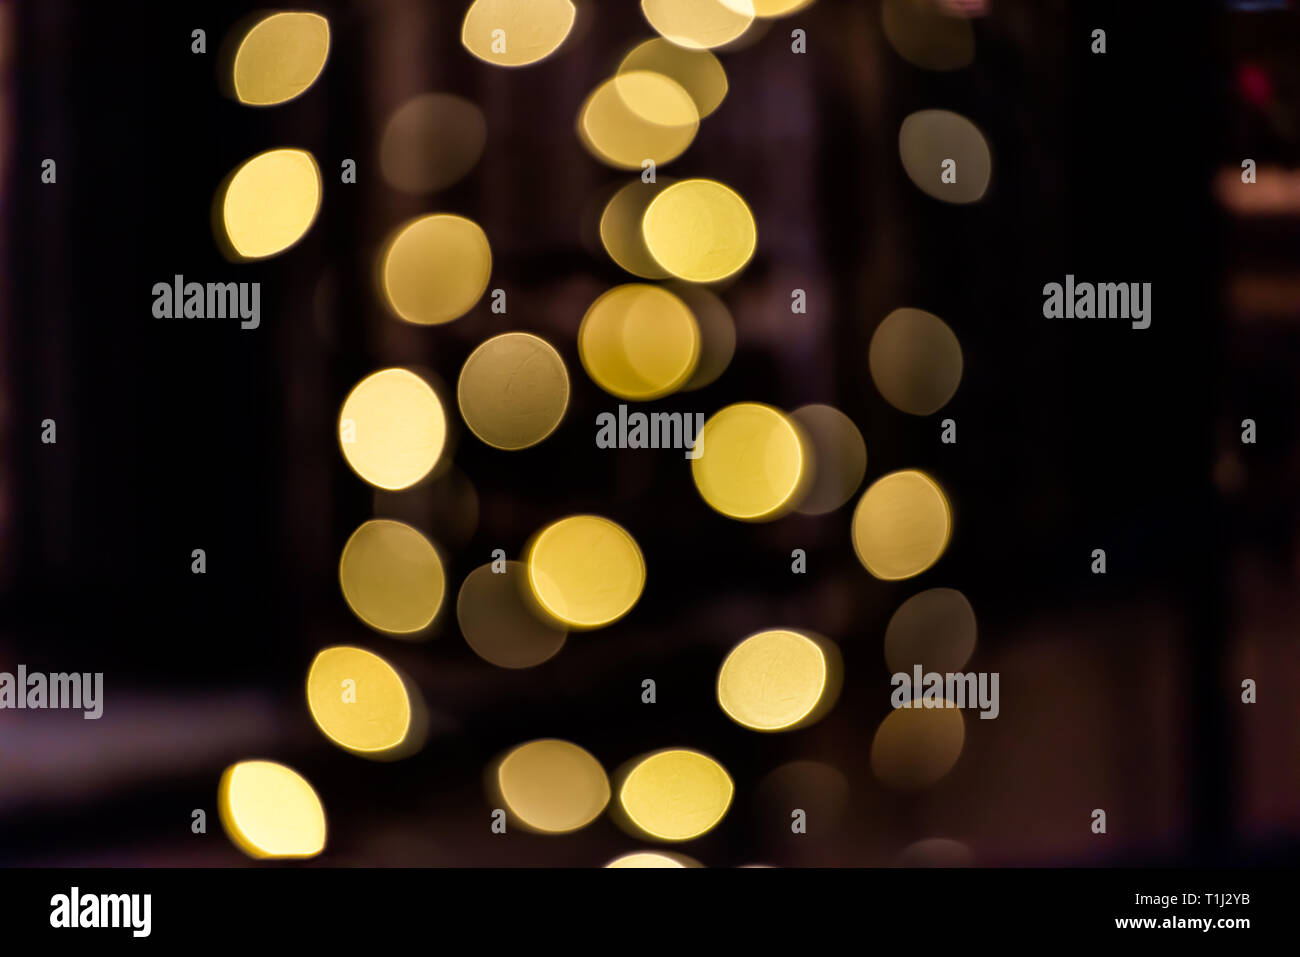 Round bokeh abstract background with yellow golden circles illuminated decoration lights on tree at night evening dark black christmas Stock Photo